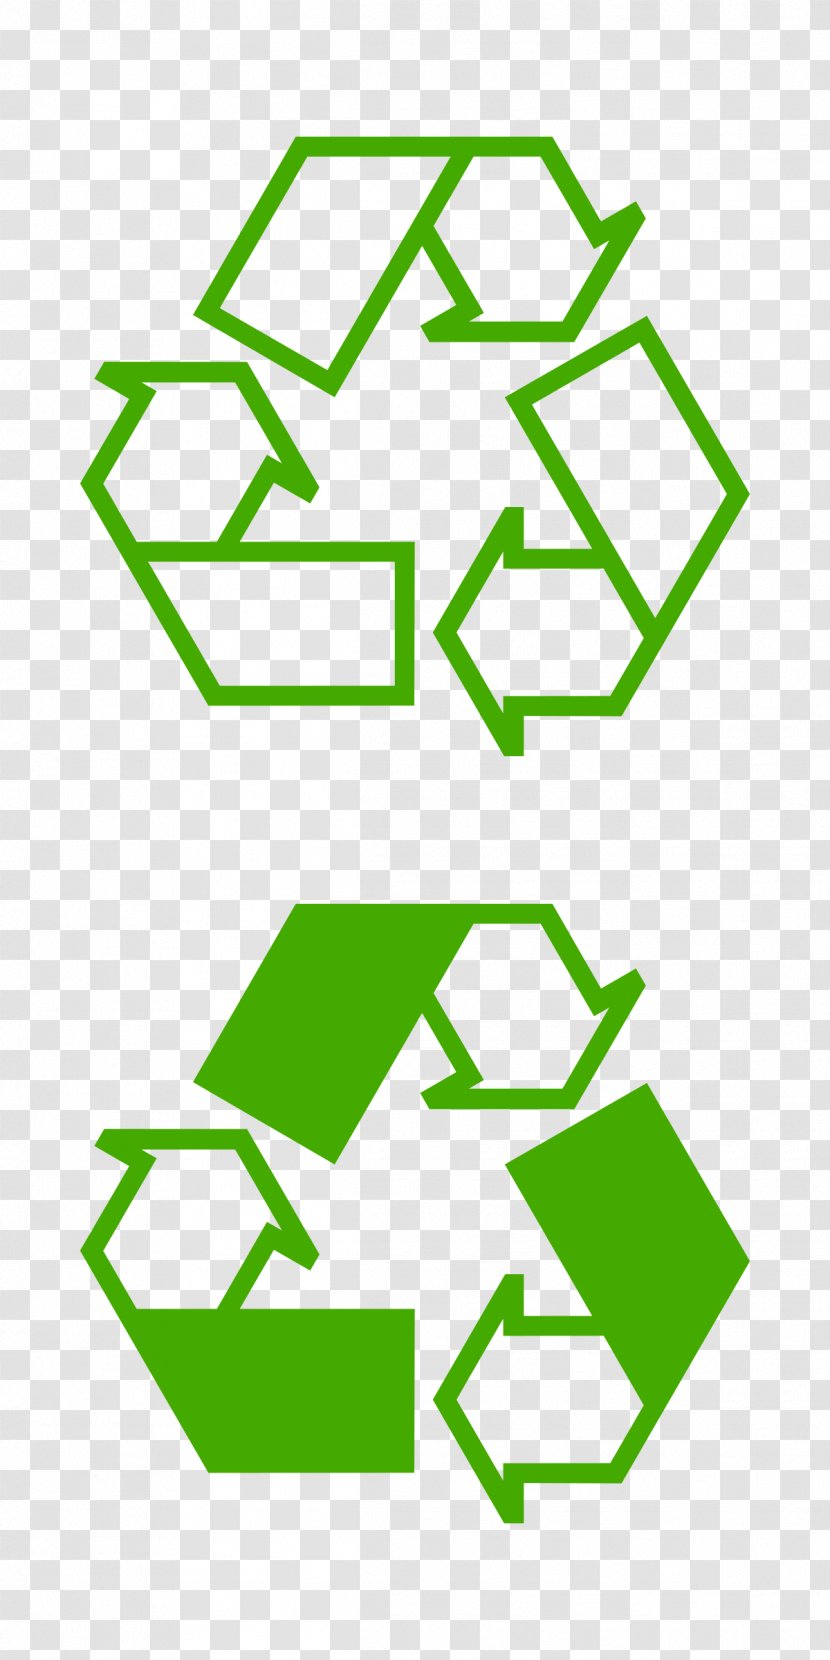 Paper Recycling Symbol Clip Art - Waste Hierarchy - Recycle Bin Transparent PNG